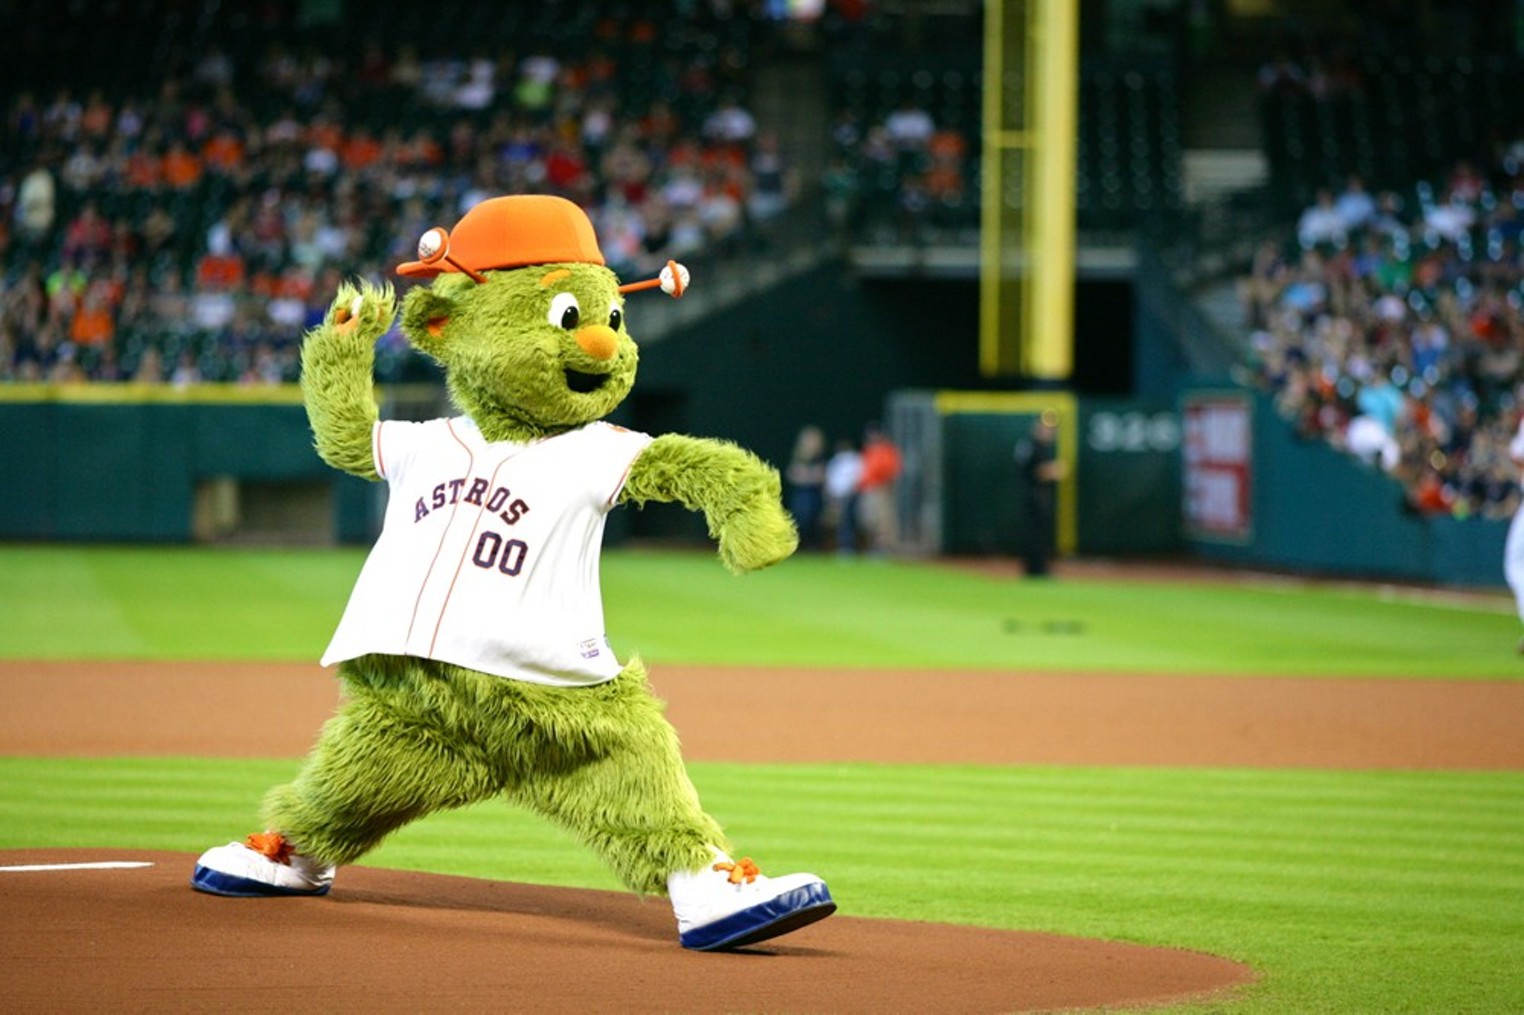 Help wanted: New Astros mascot 